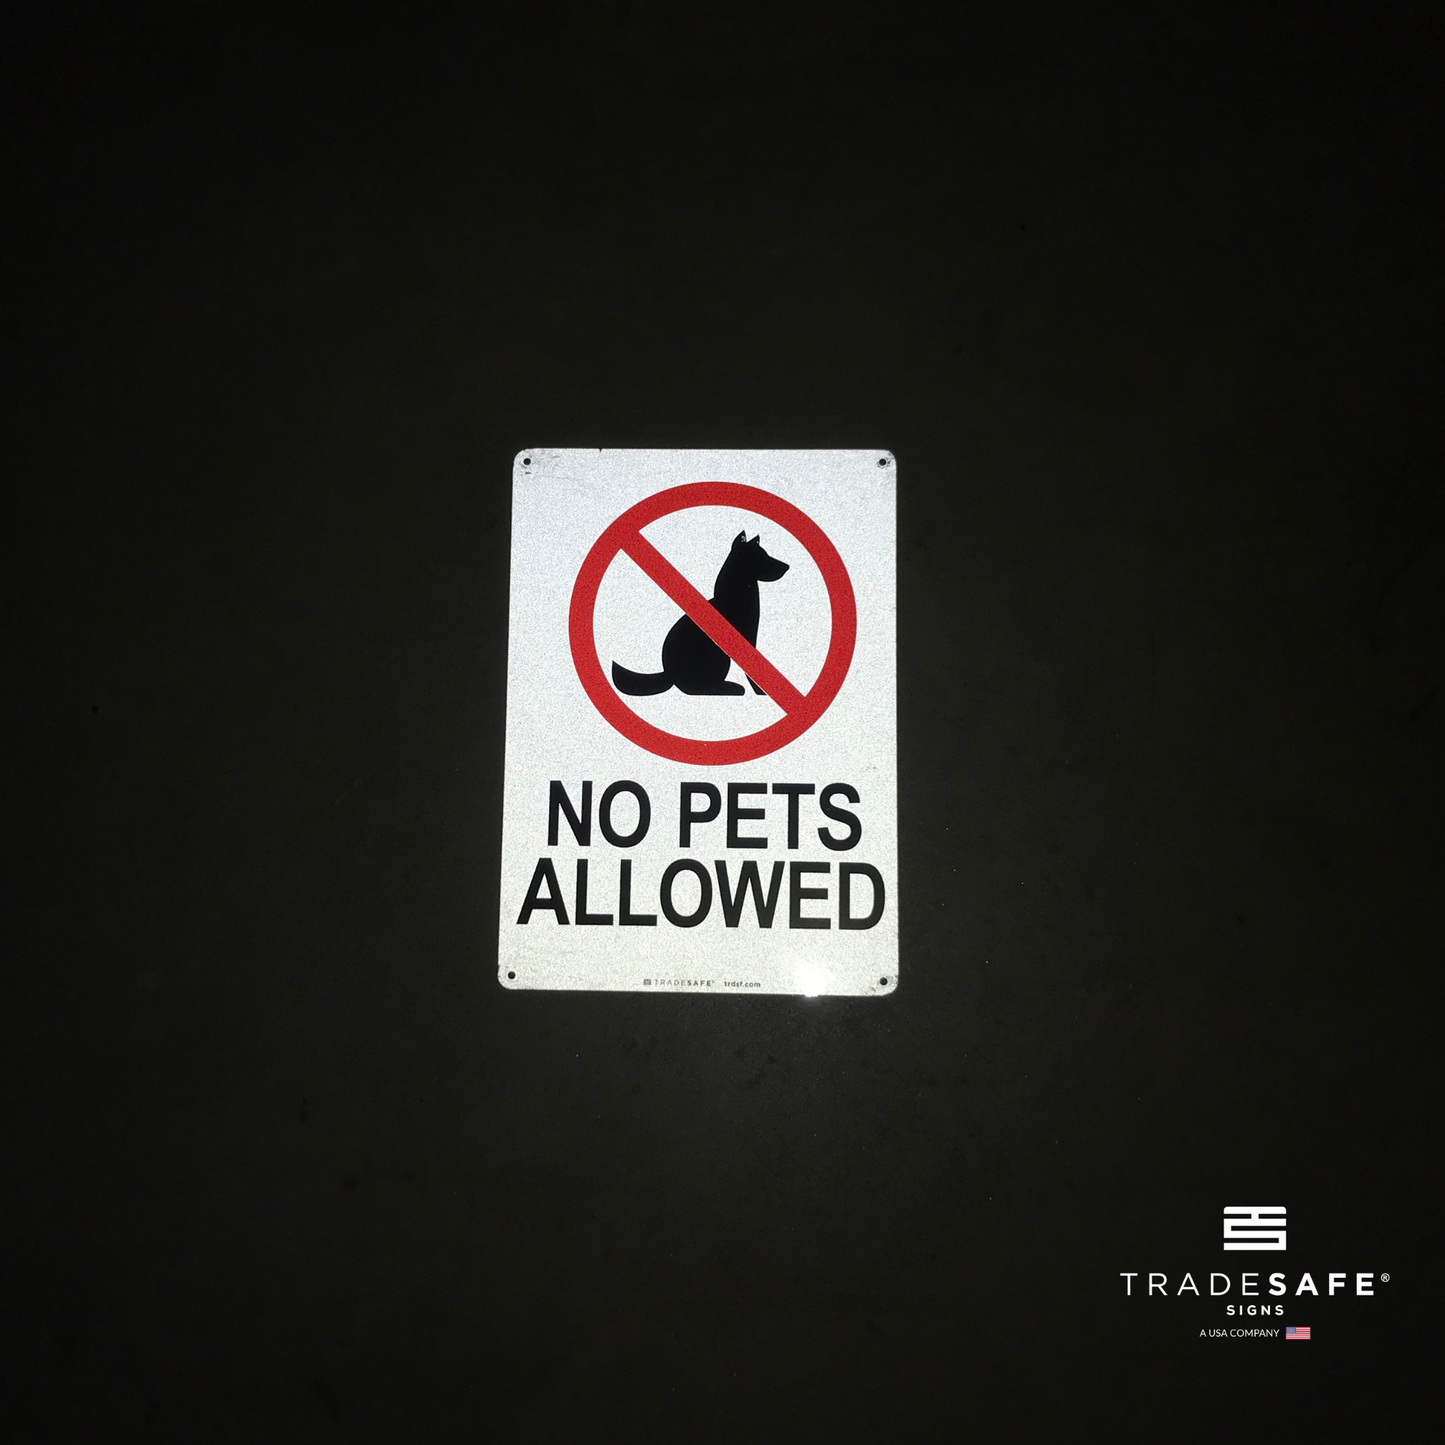 reflective attribute of no pets allowed sign on black background